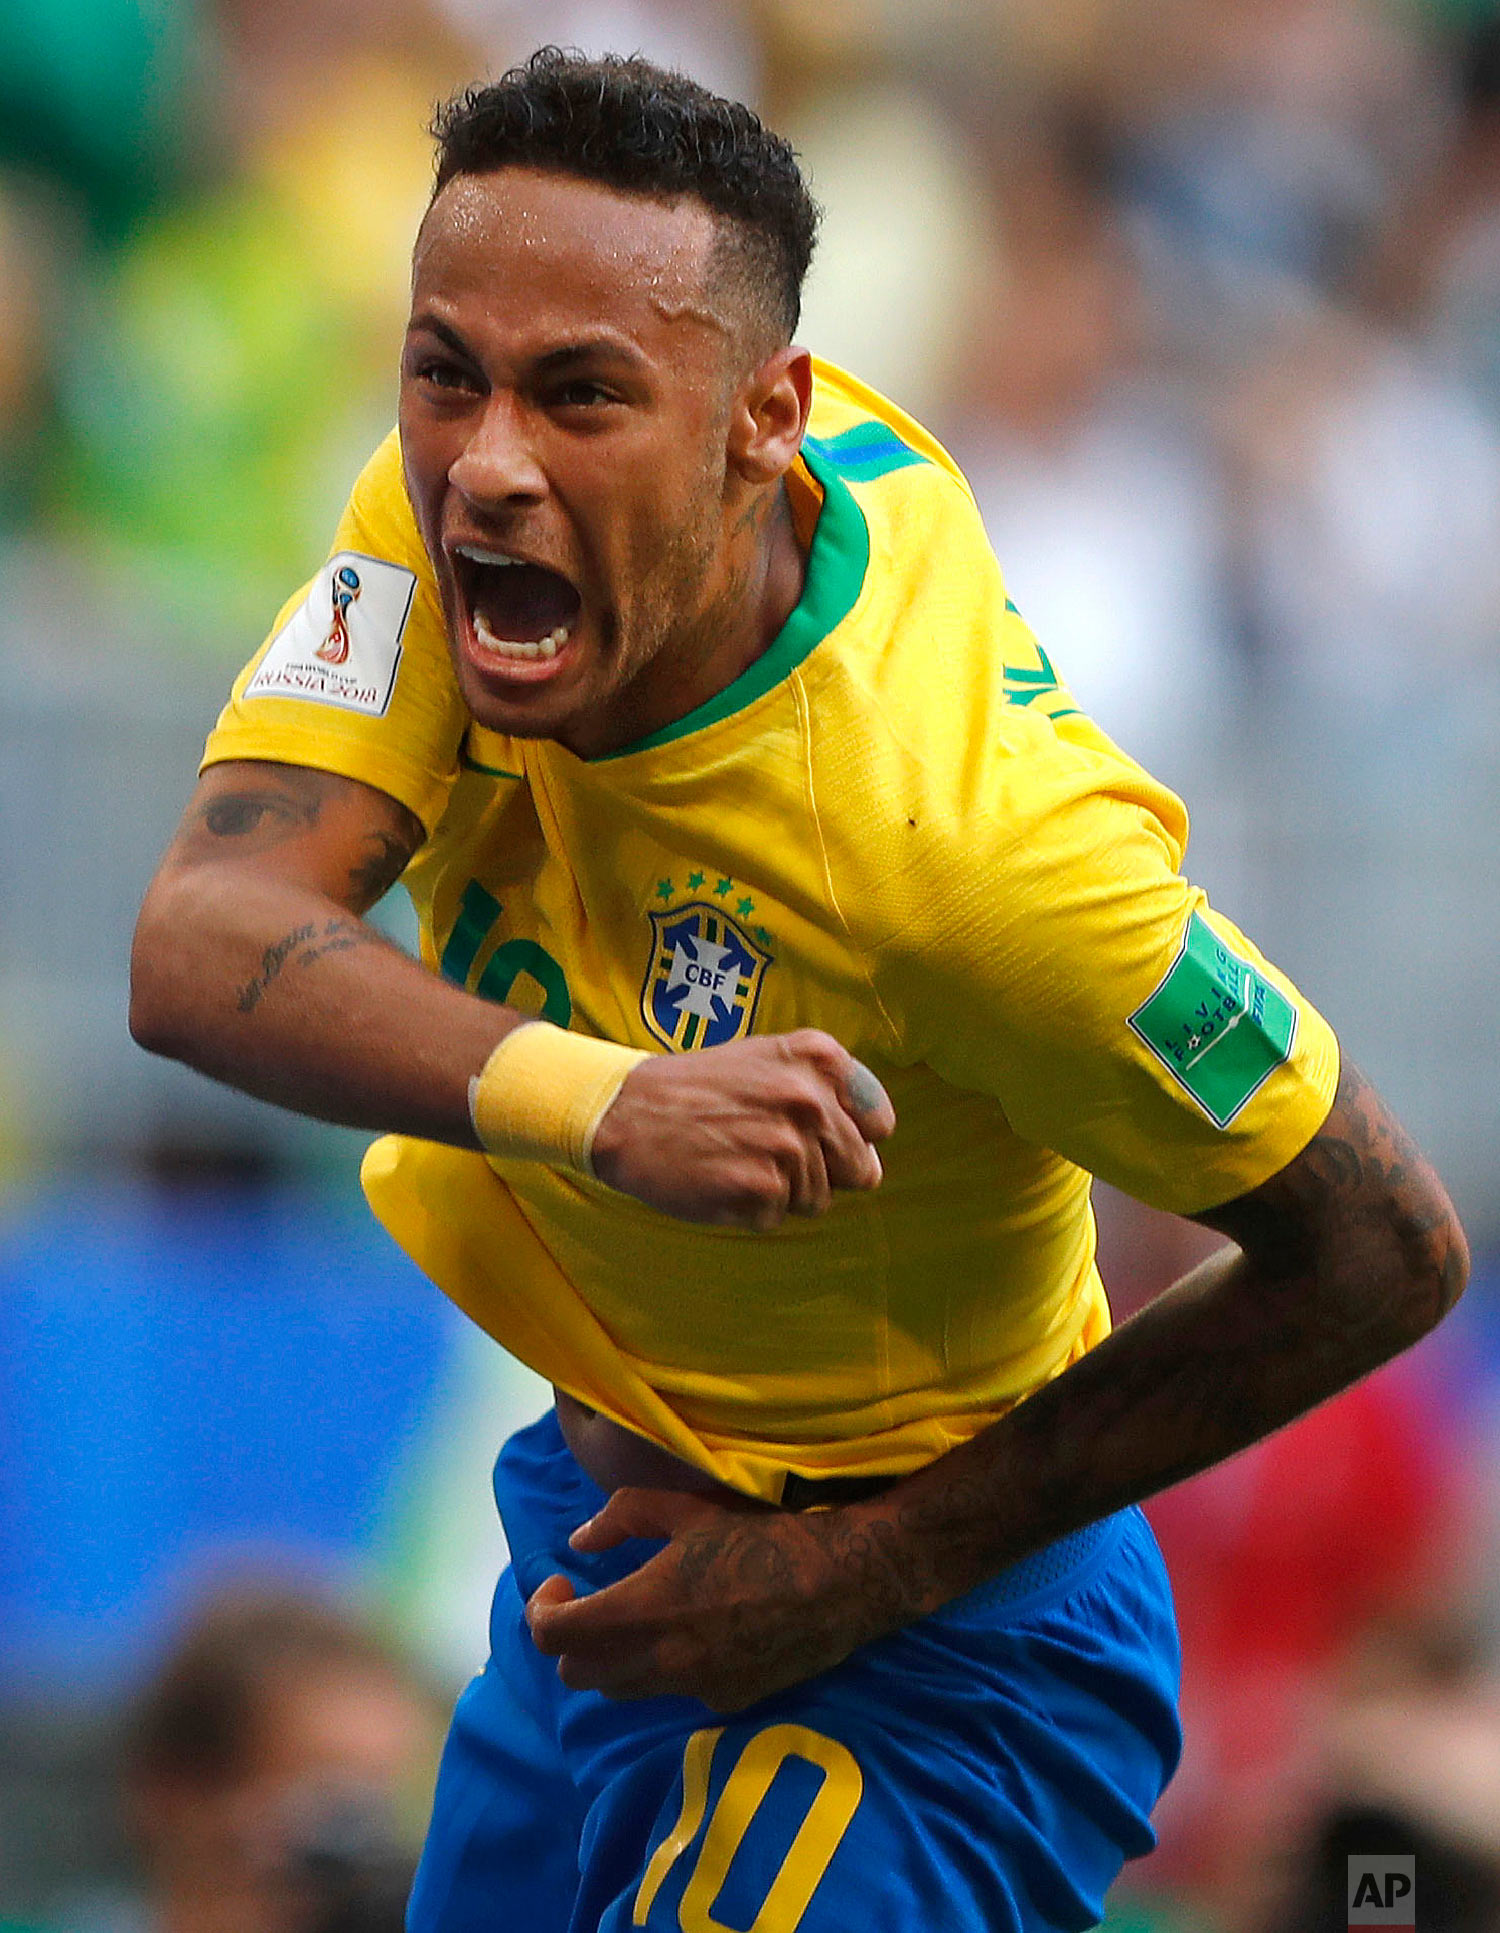  Brazil's Neymar celebrates after scoring his side's opening goal during the round of 16 match between Brazil and Mexico at the 2018 soccer World Cup in the Samara Arena, in Samara, Russia on July 2, 2018. (AP Photo/Frank Augstein) 